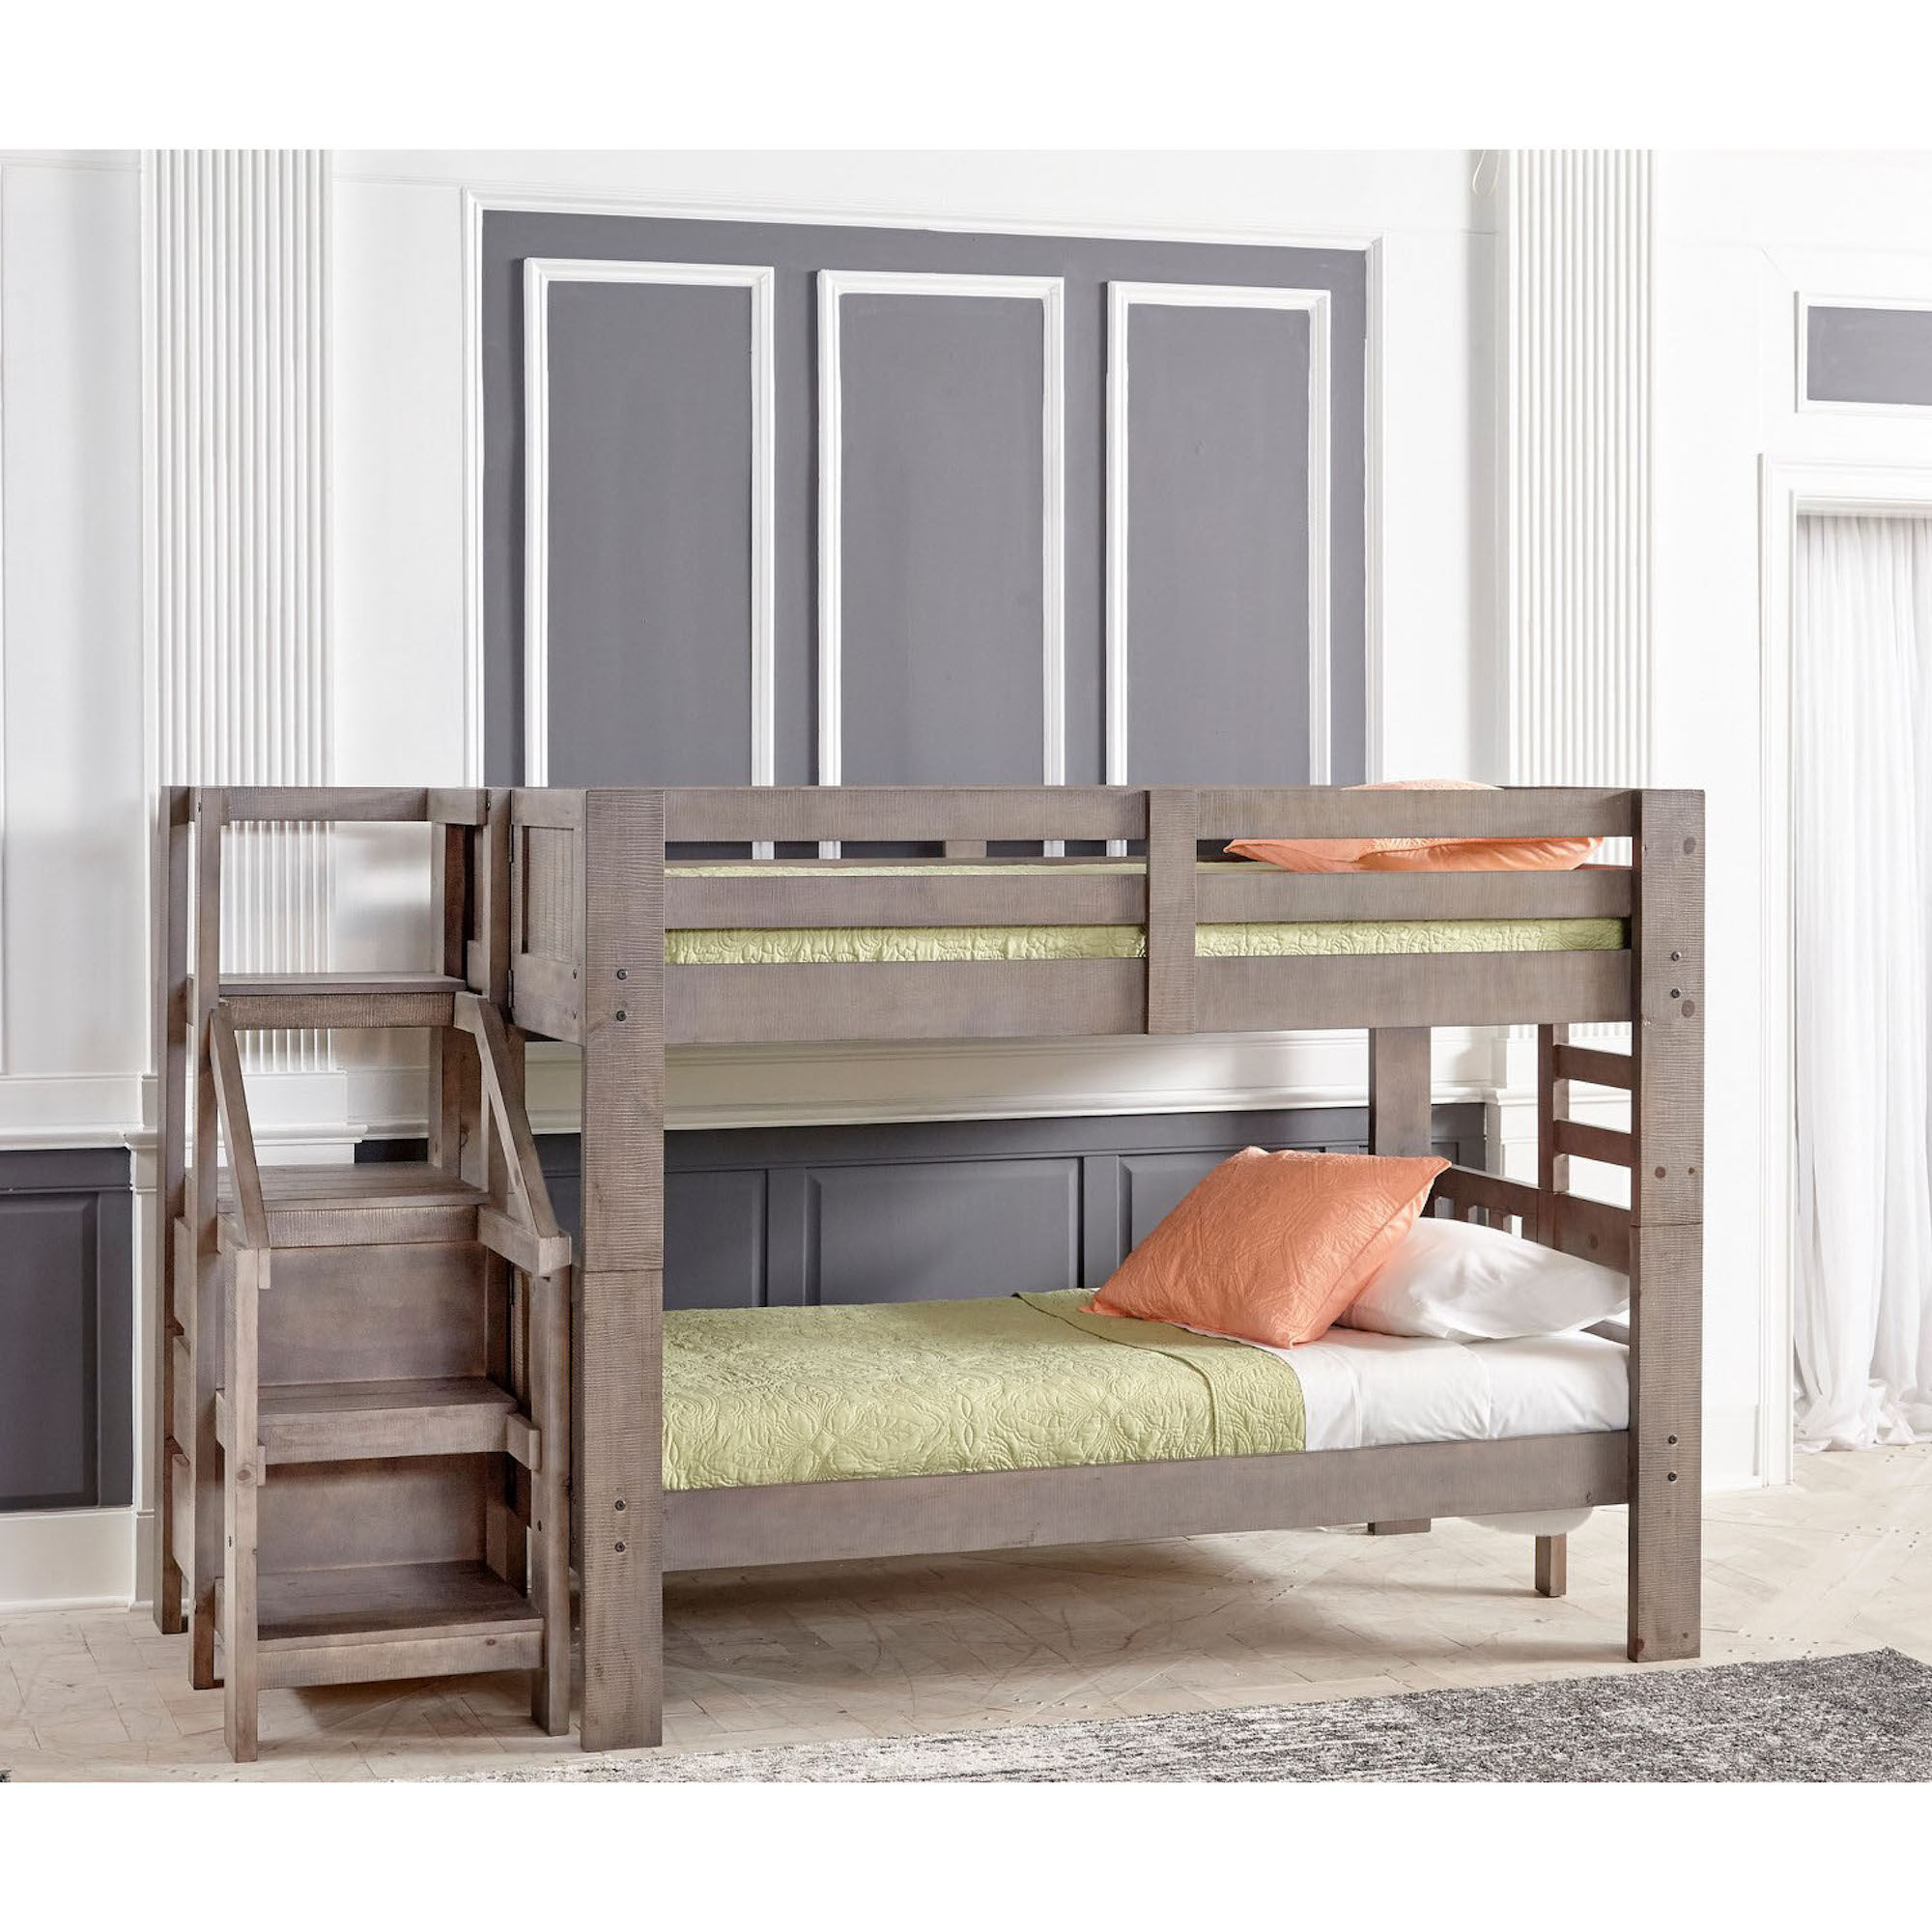 where can i find bunk beds